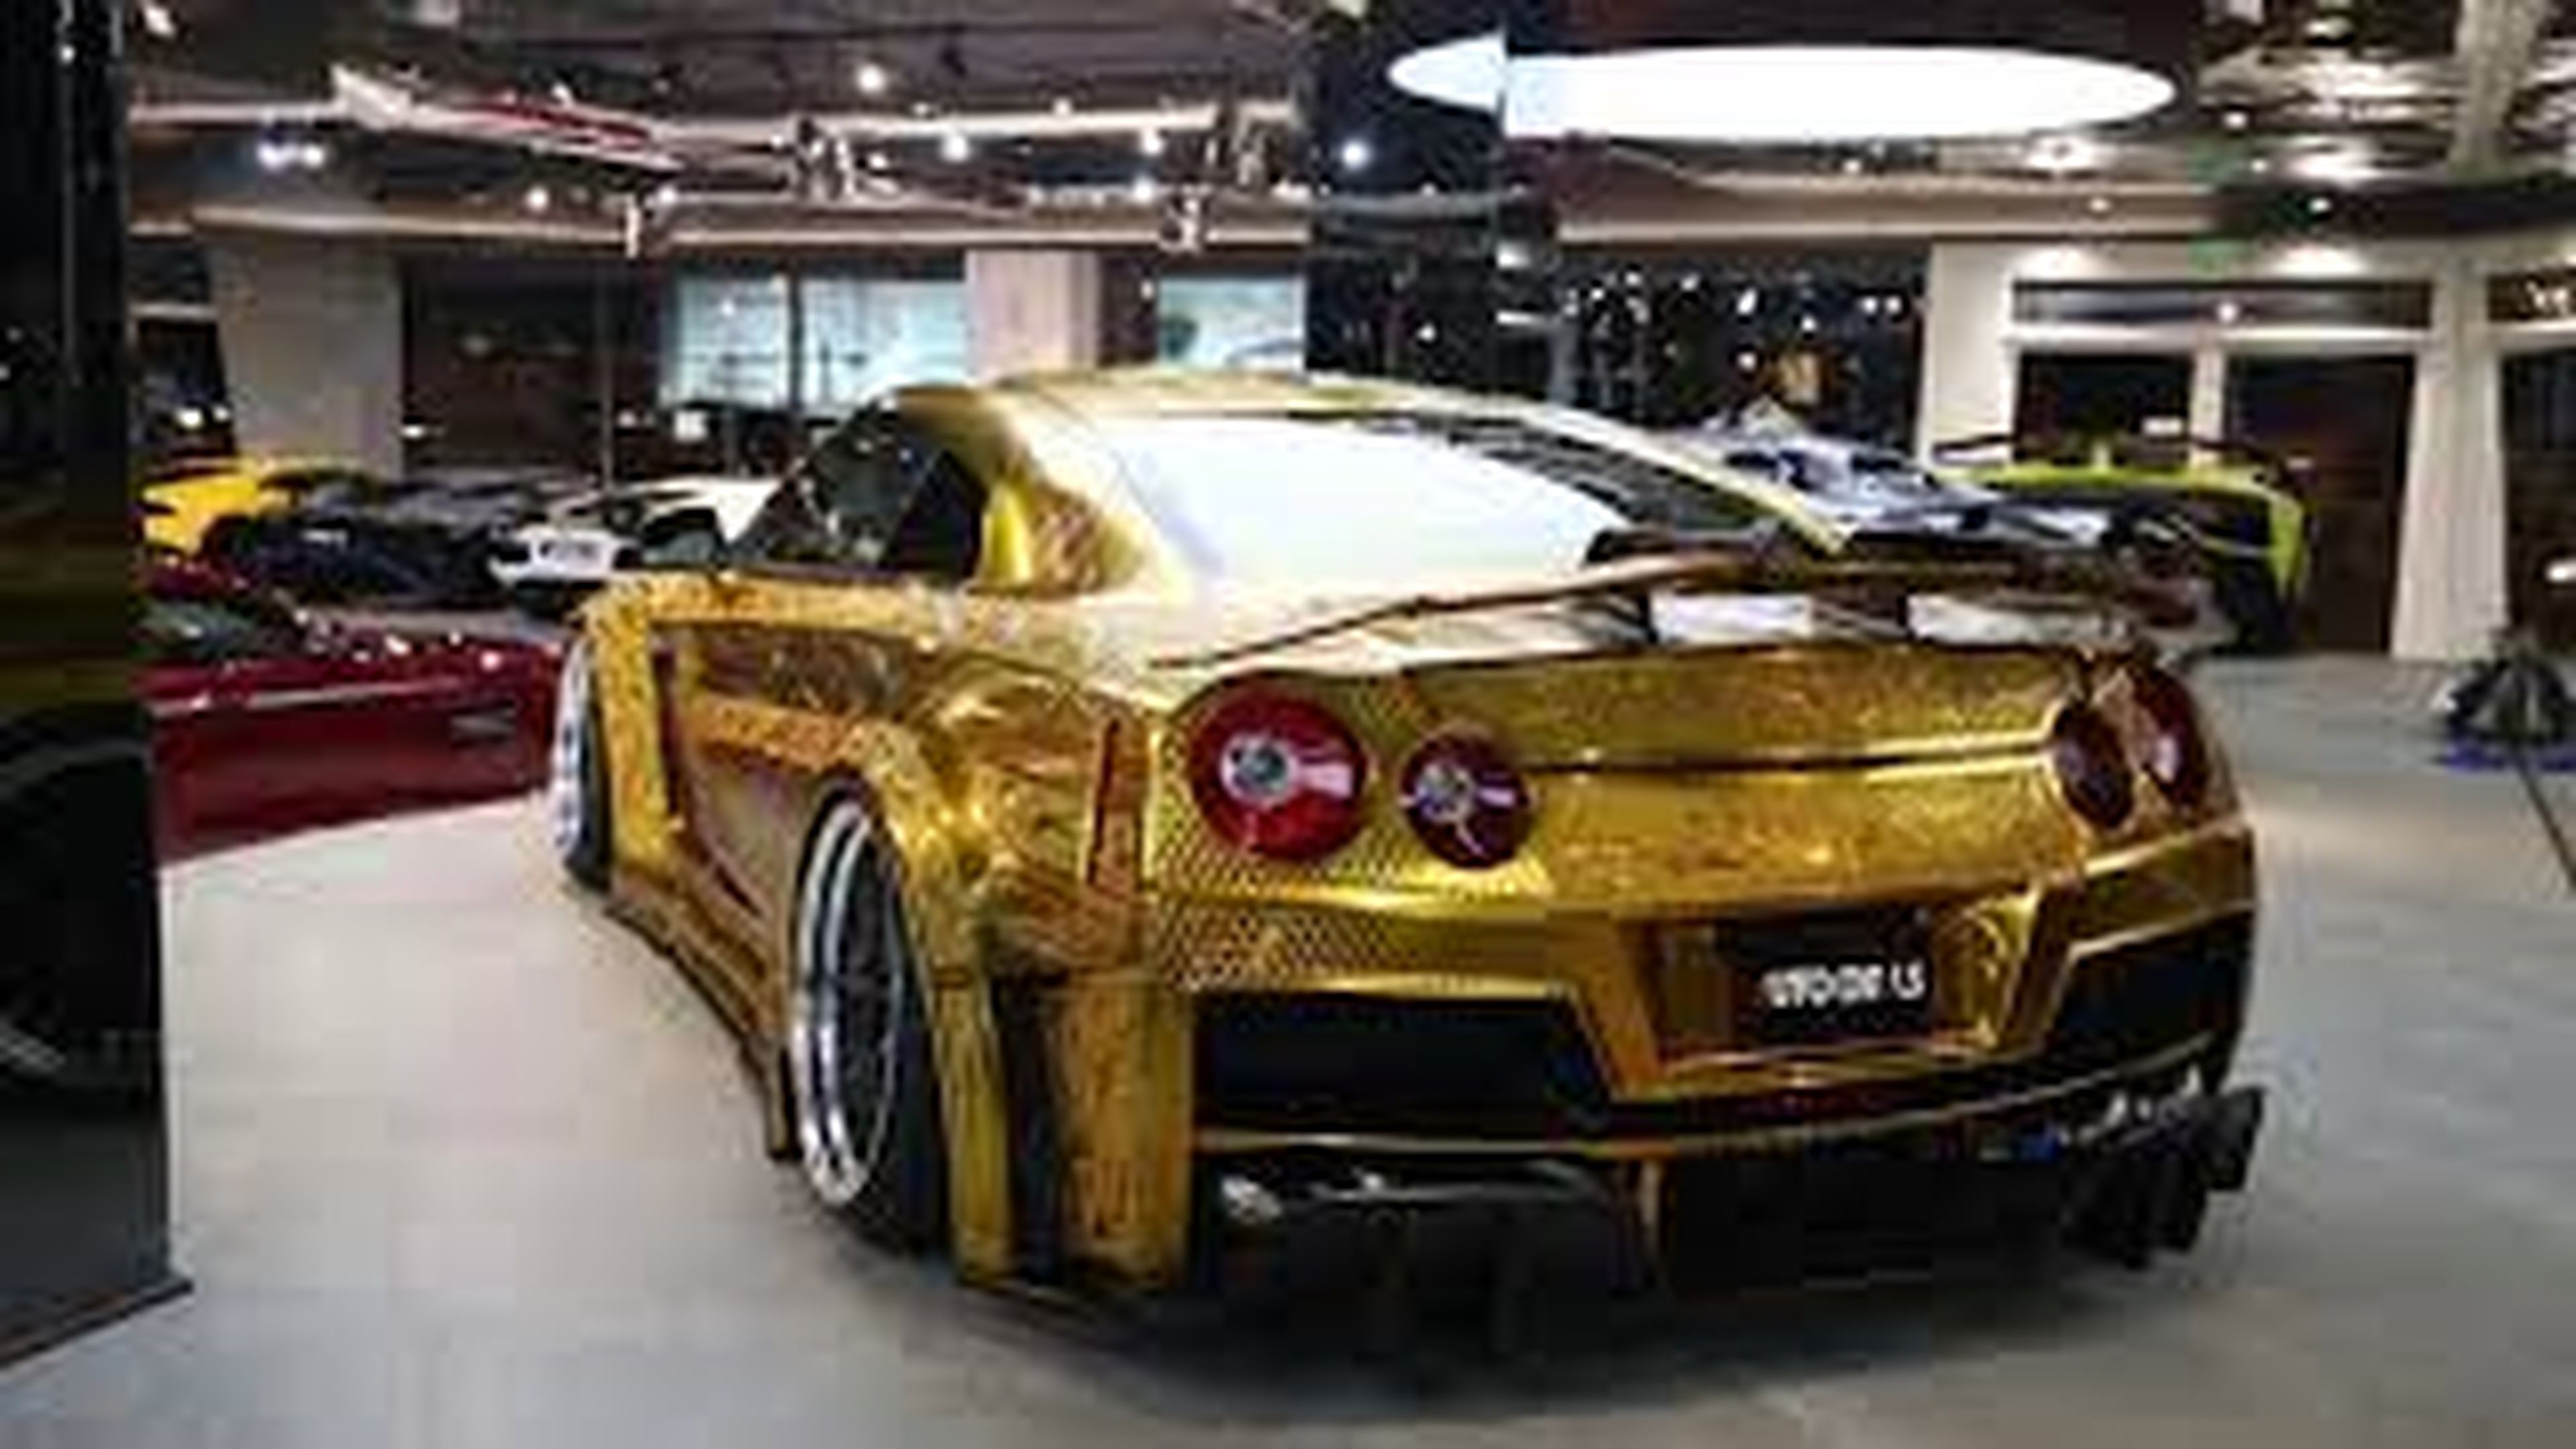 NISSAN GT-R R35 KUHL RACING EDITION Gold Plated Engraved Wide Body Kit | Most Expensive GTR